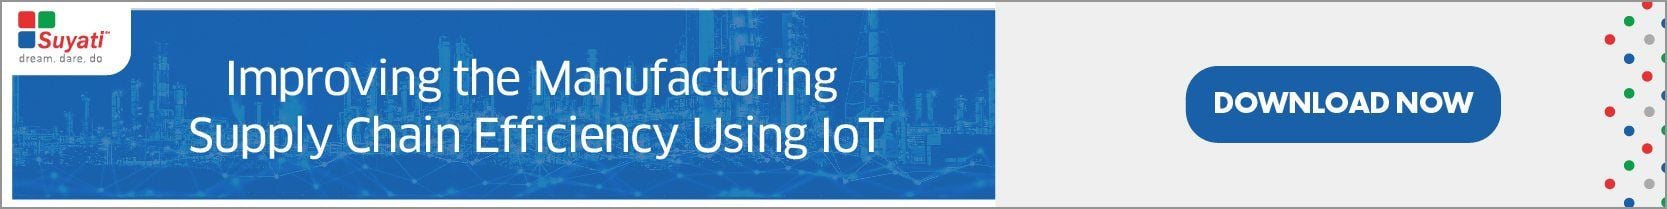 E-Book - Improving the Manufacturing Supply Chain Efficiency using IOT